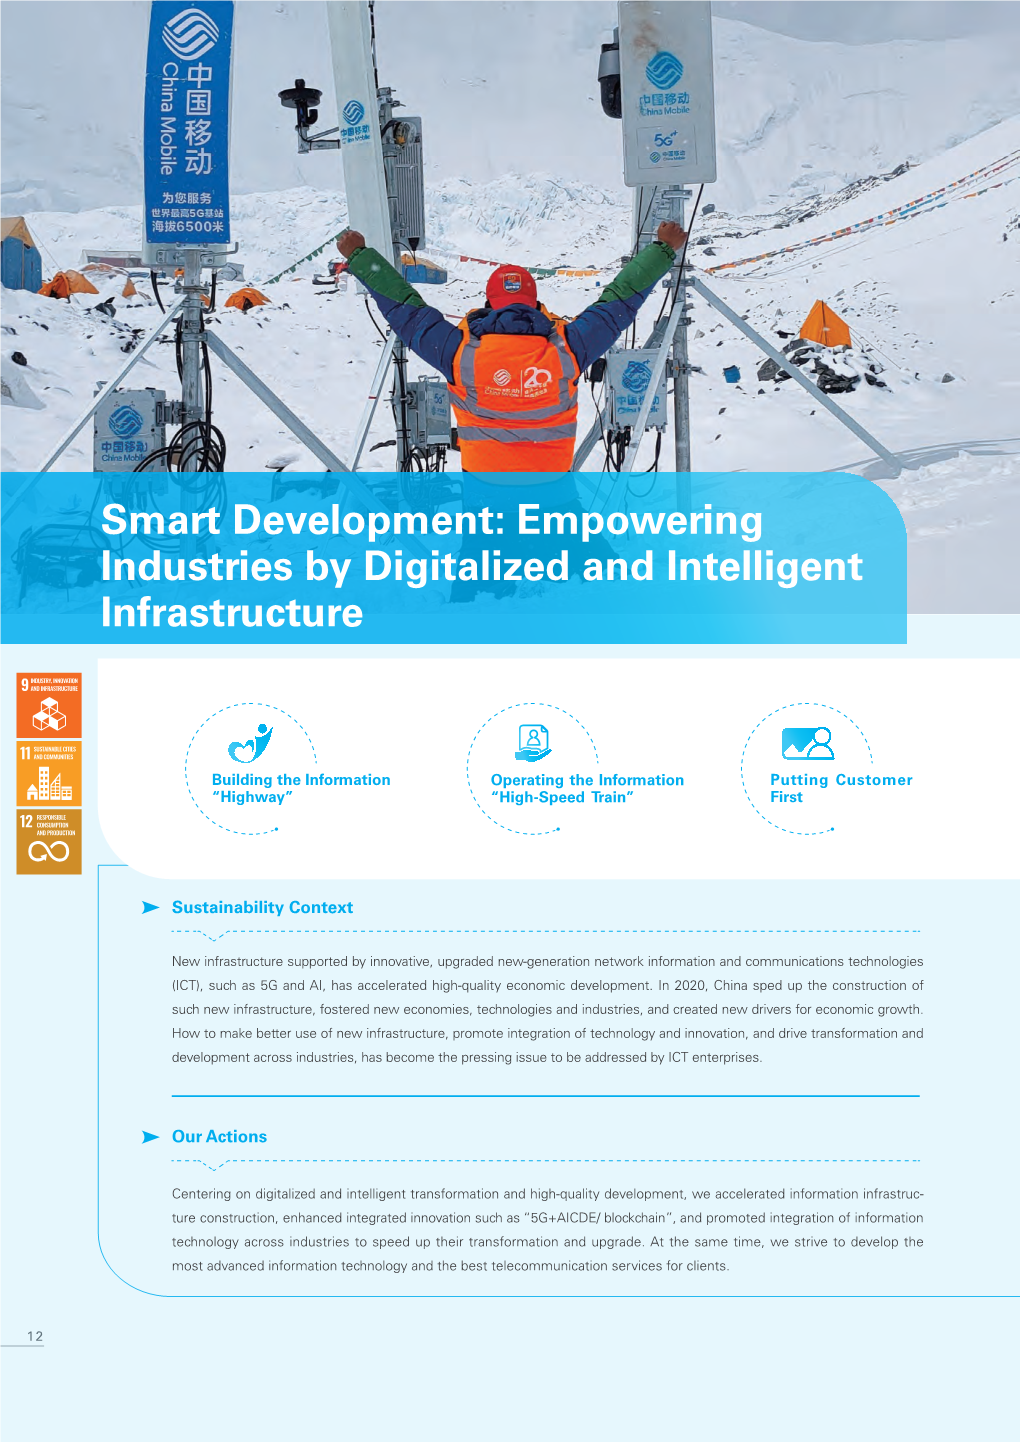 Smart Development: Empowering Industries by Digitalized and Intelligent Infrastructure